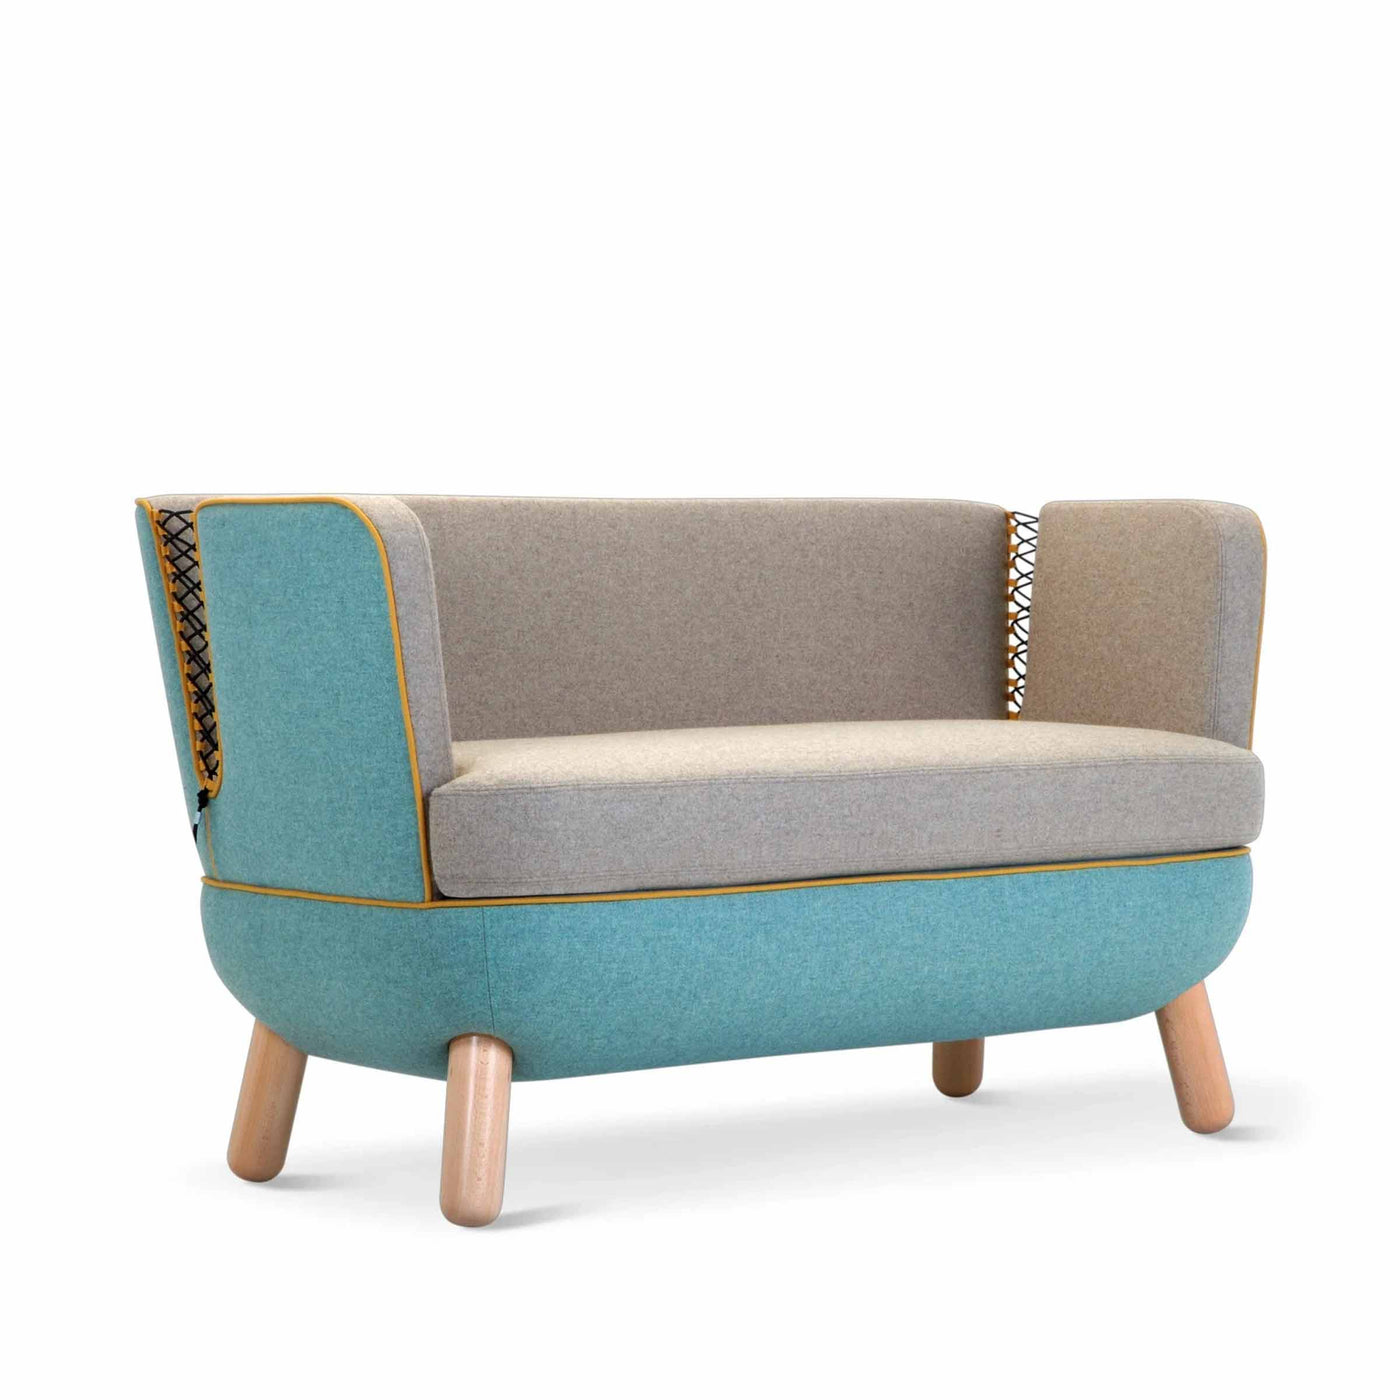 Two-Seater Sofa SLY by Italo Pertichini for Adrenalina 02